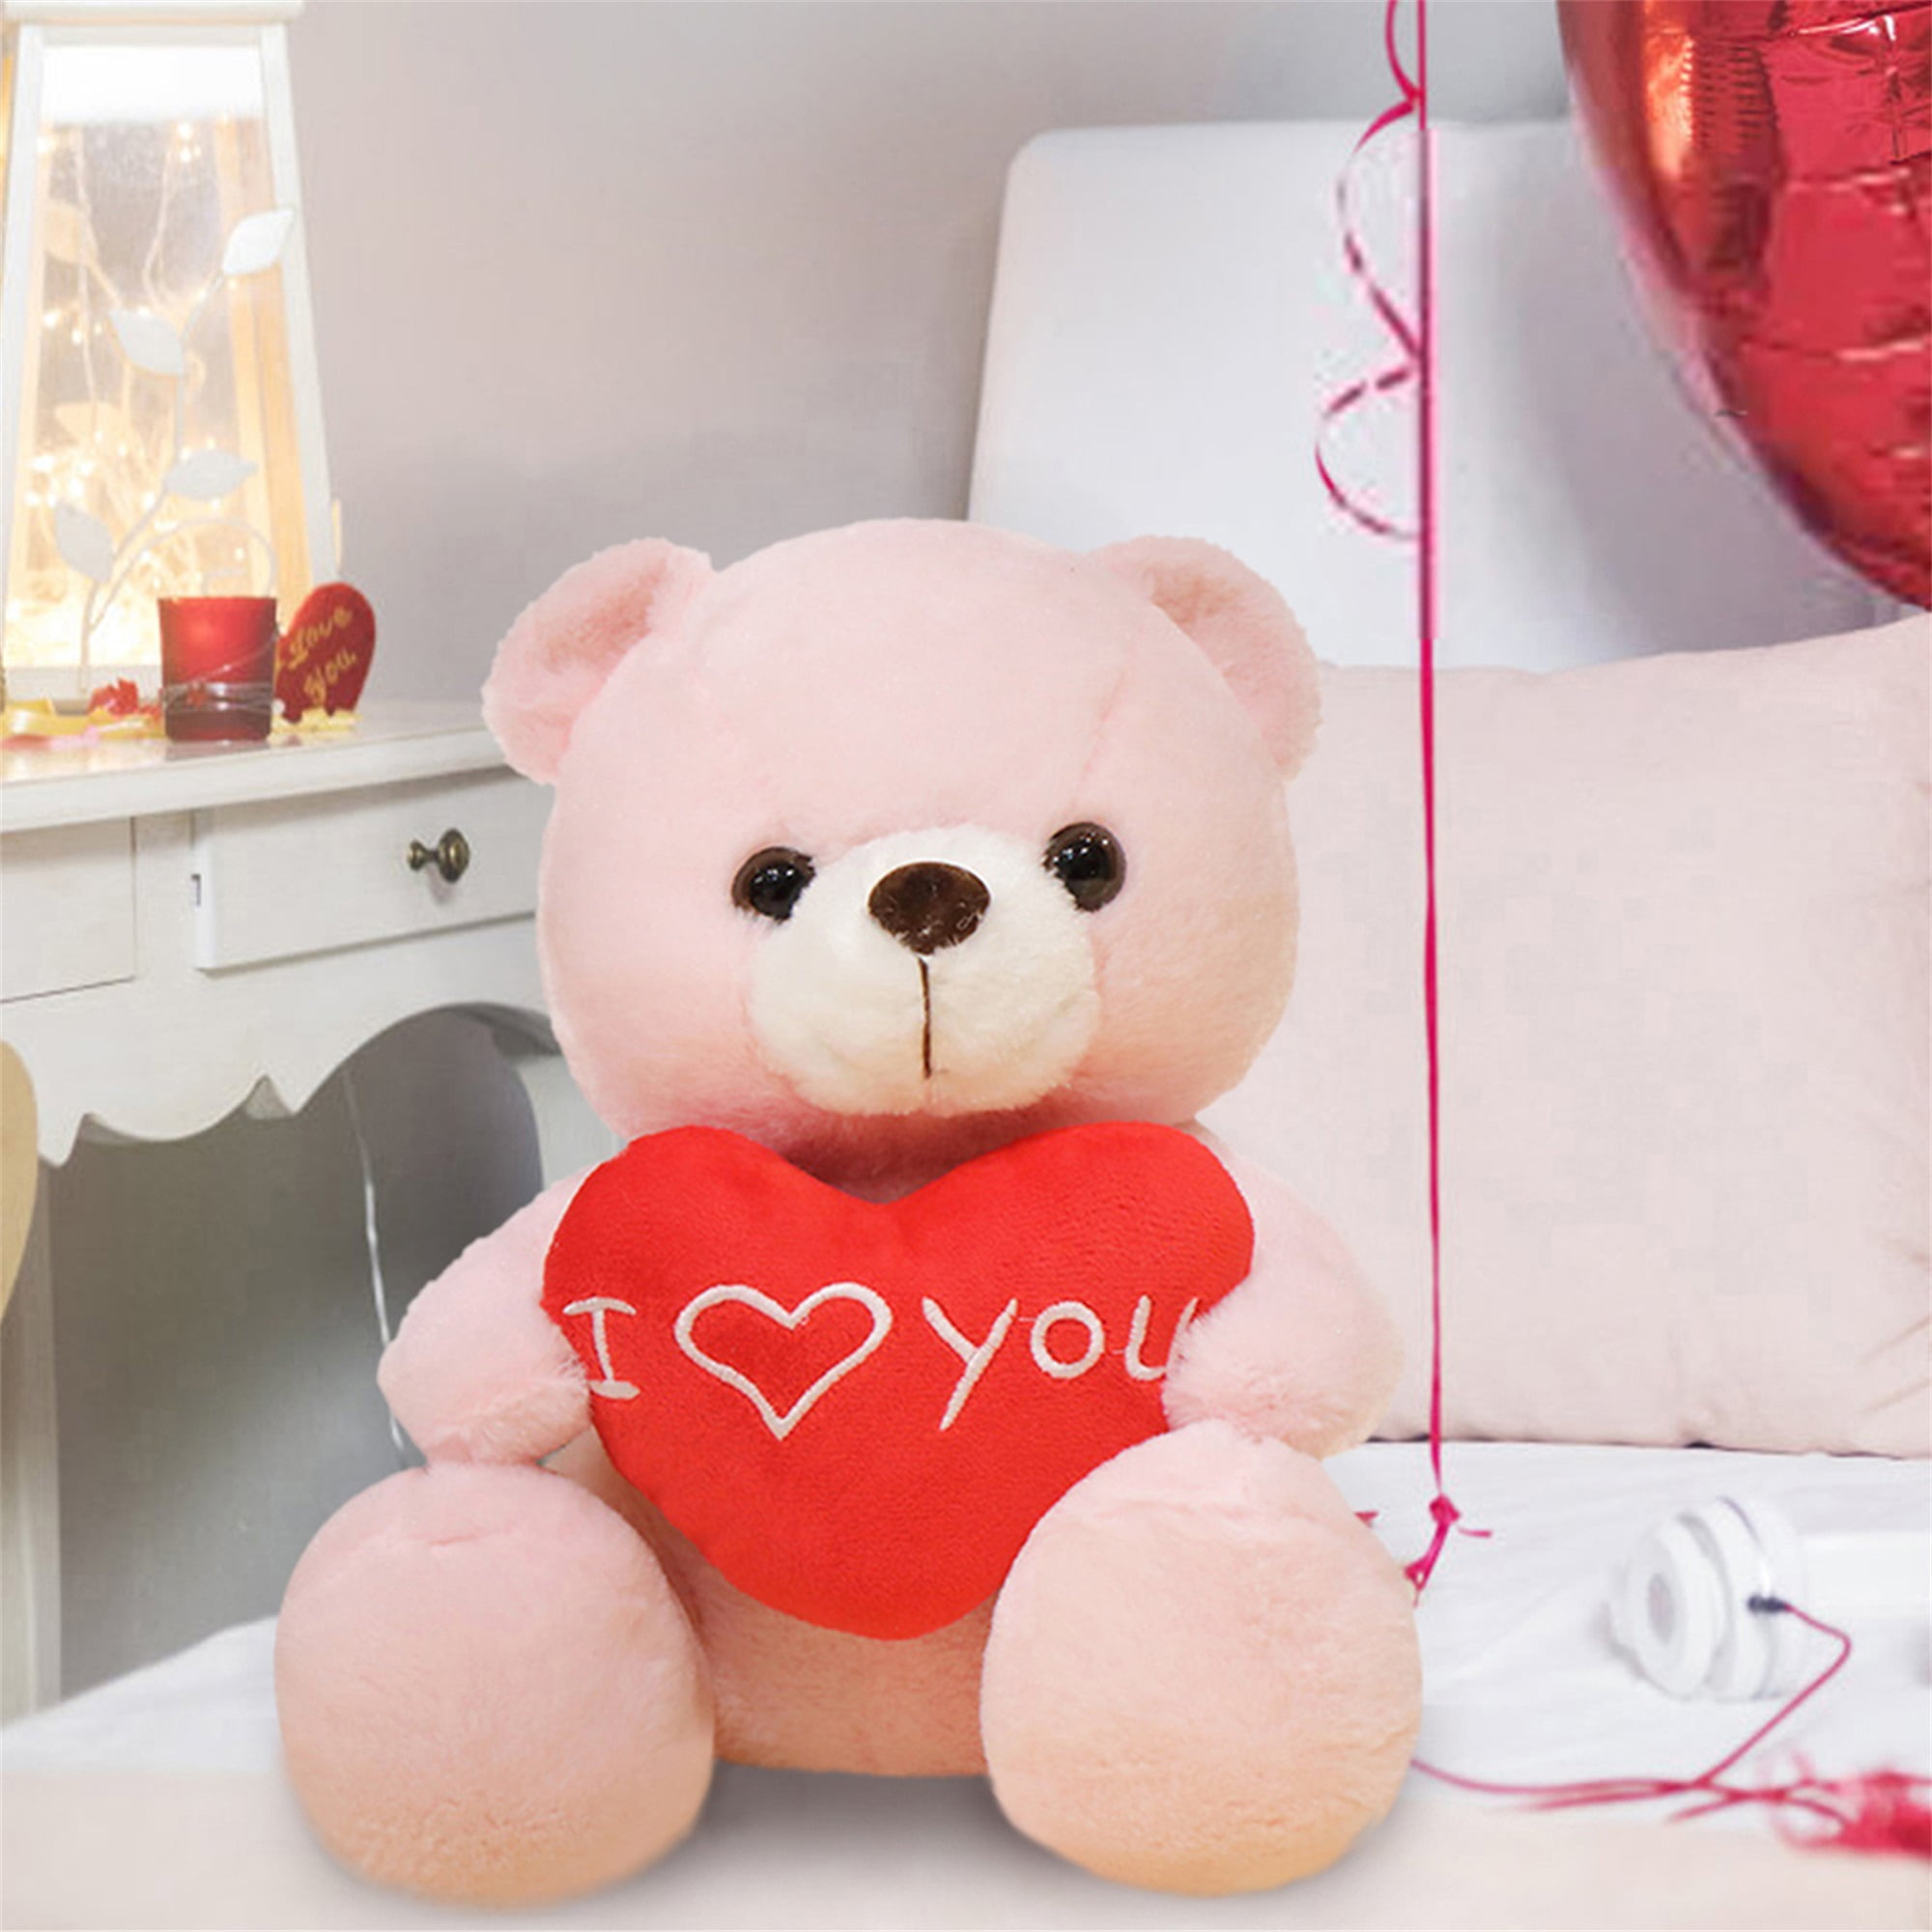 FamilyStore 91 cm Pink high quality teddy bear/anniversary gift/cute and  soft/someone special/hug able teddy bear - 91.016 cm - 91 cm Pink high  quality teddy bear/anniversary gift/cute and soft/someone special/hug able  teddy